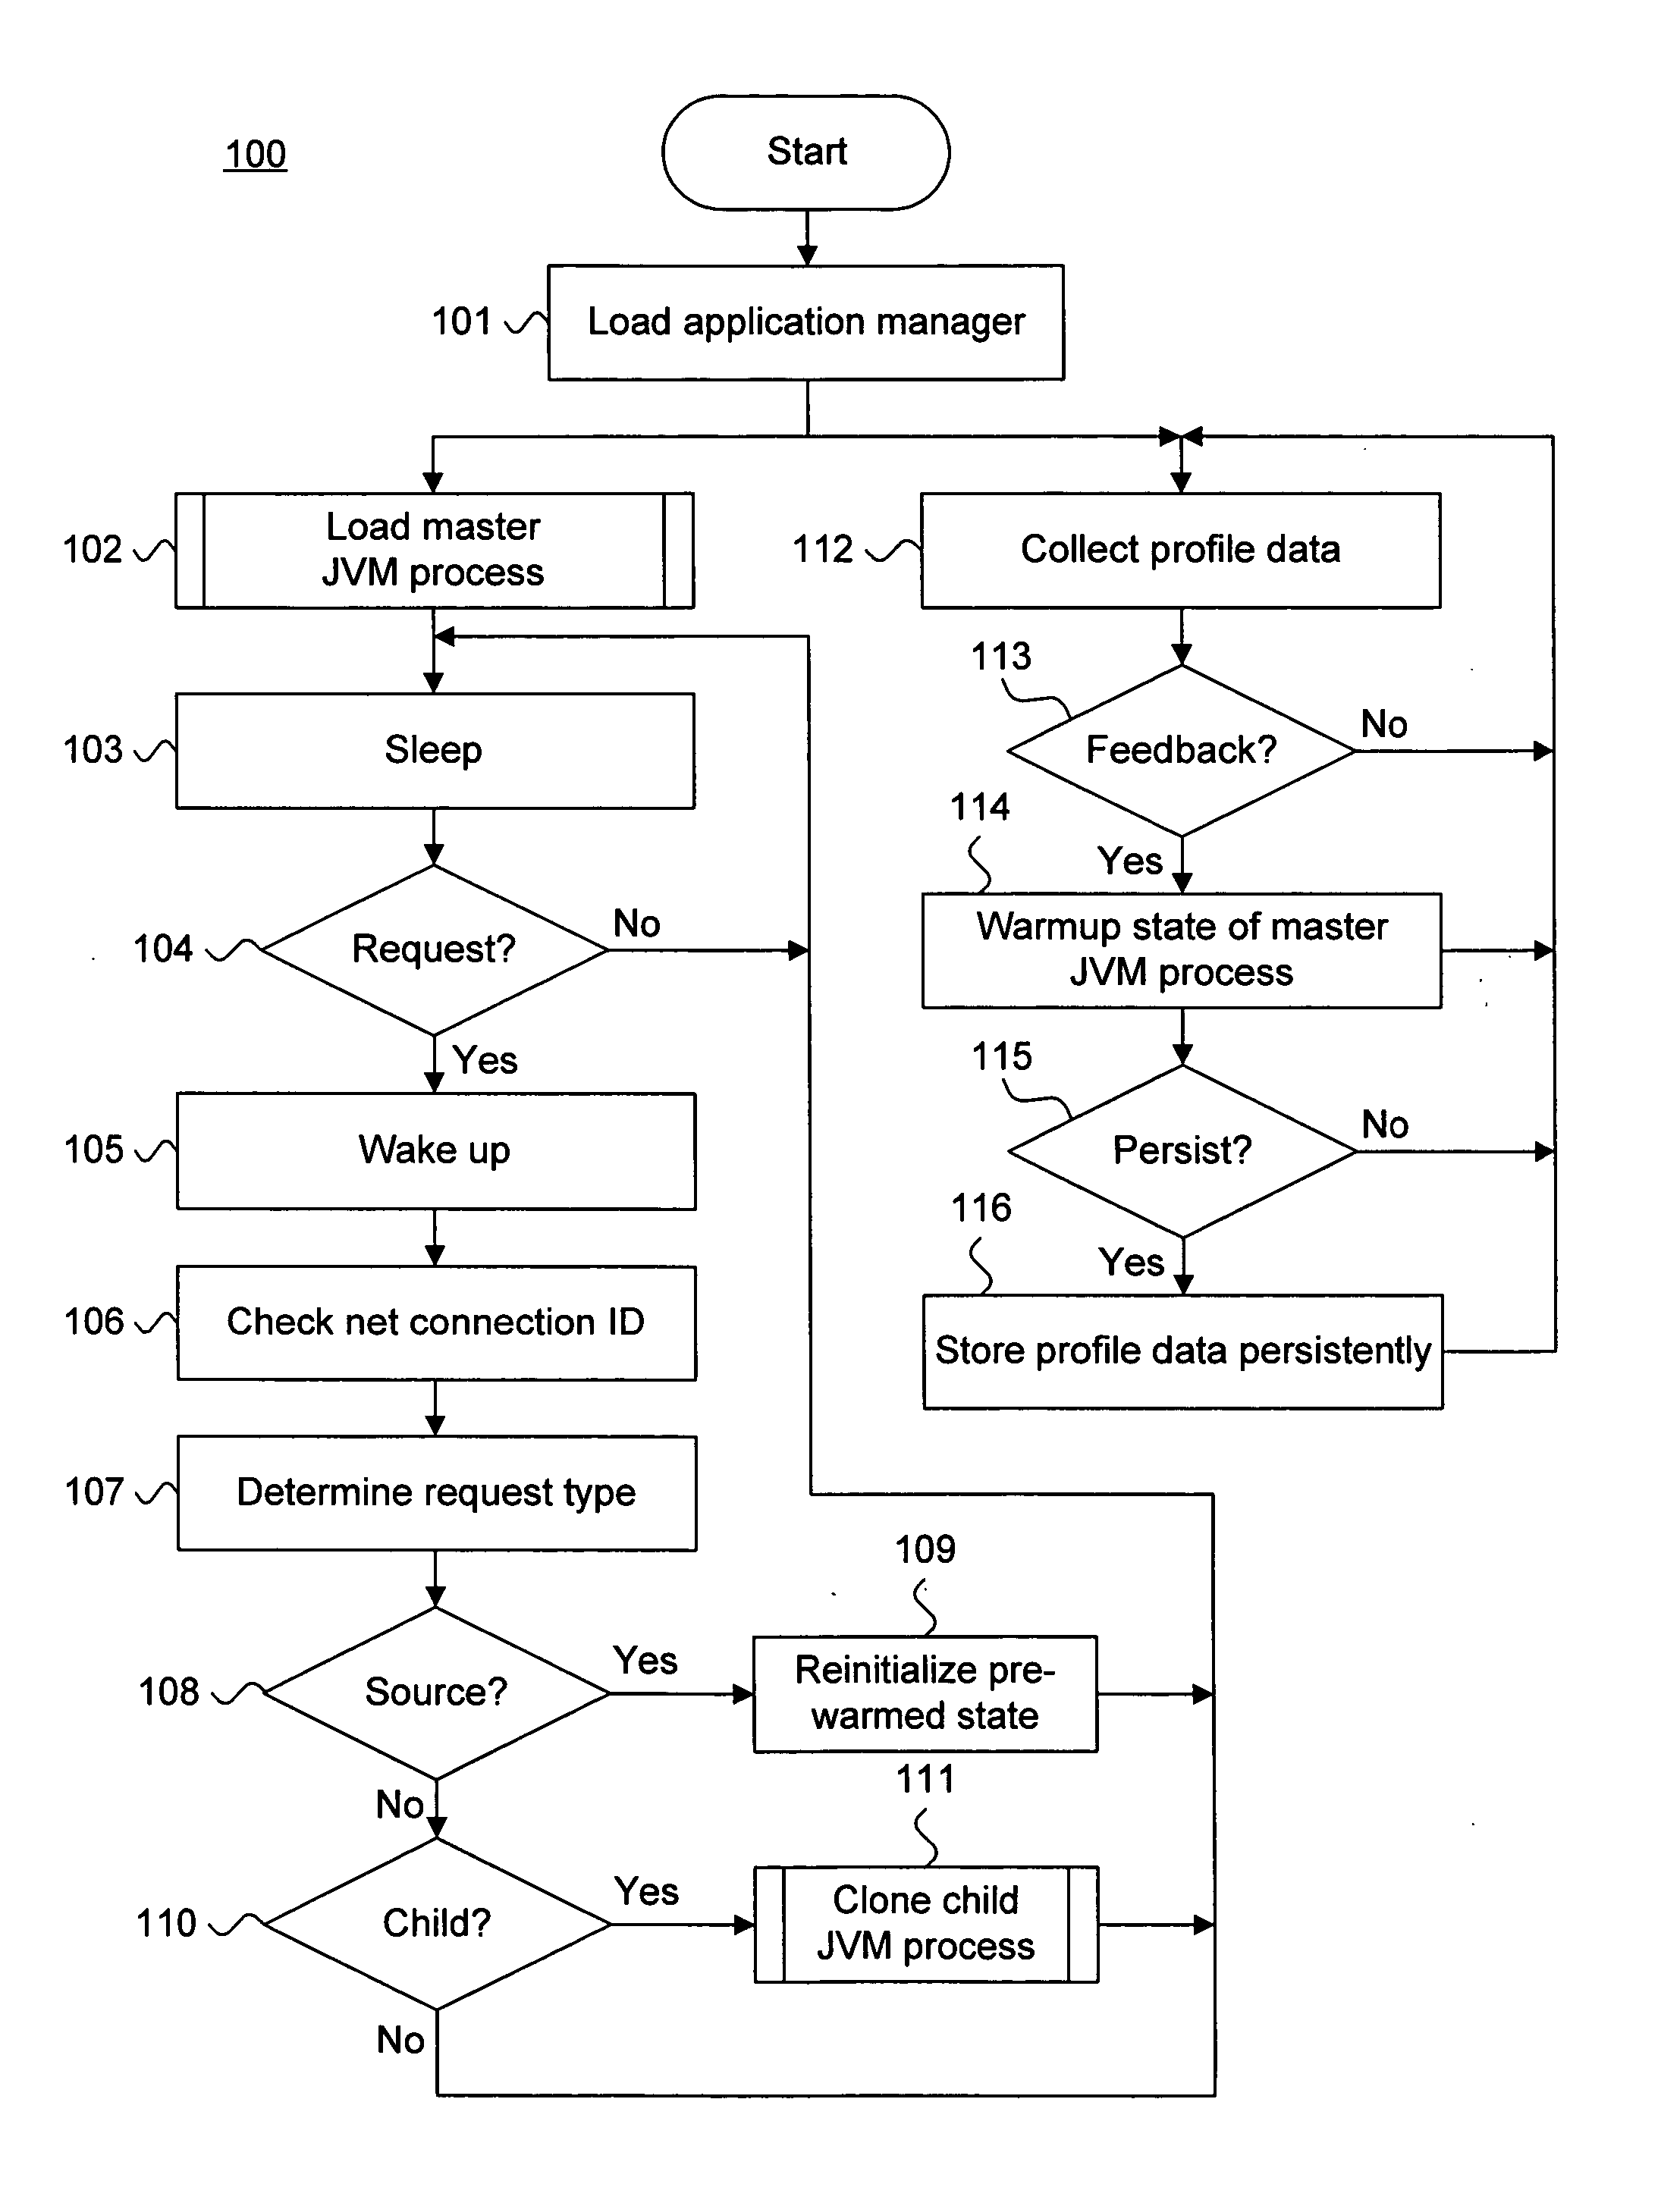 System and method for dynamically and persistently tracking incremental profiling data in a process cloning application environment